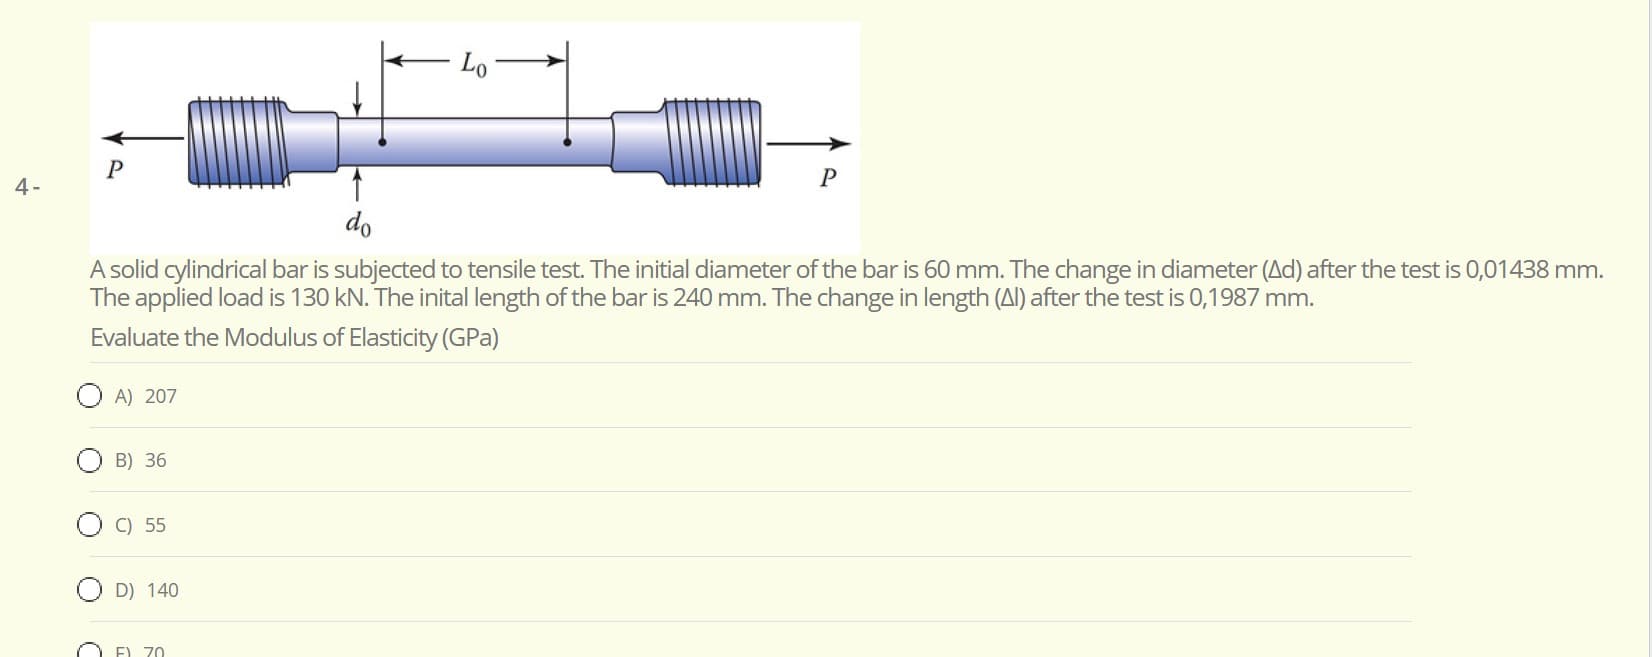 A solid cylindrical bar is subjected to tensile test. The initial diameter of the bar is 60 mm. The change in diameter (Ad) after the test is 0,01438 mm.
The applied load is 130 kN. The inital length of the bar is 240 mm. The change in length (Al) after the test is 0,1987 mm.
Evaluate the Modulus of Elasticity (GPa)
